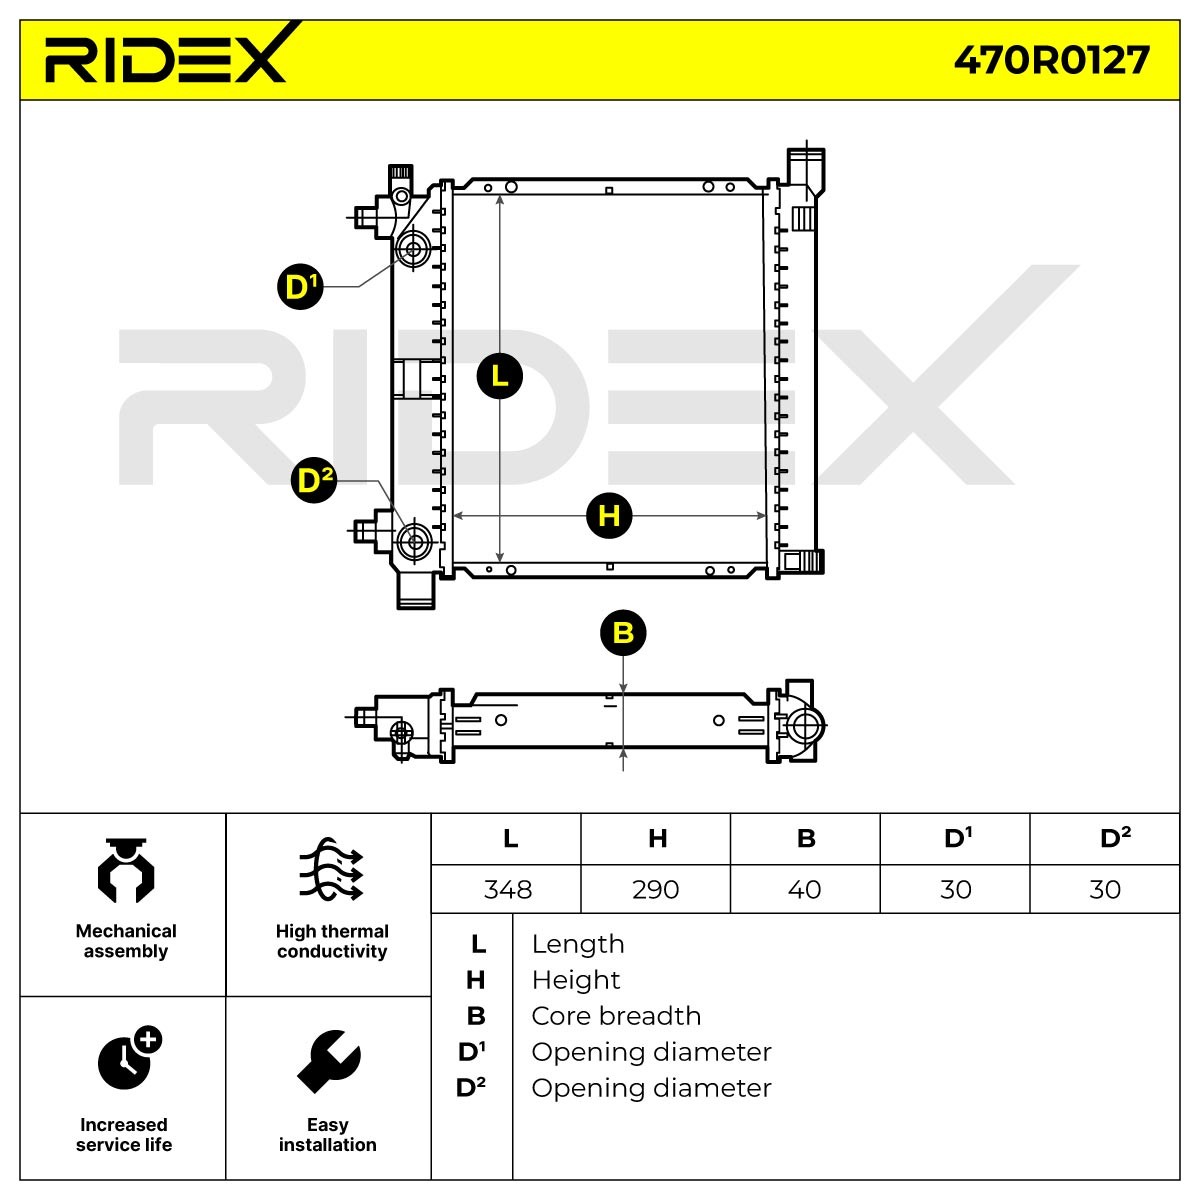 RIDEX 470R0127 Engine radiator for vehicles without air conditioning, 290 x 348 x 42 mm, Manual-/optional automatic transmission, Brazed cooling fins